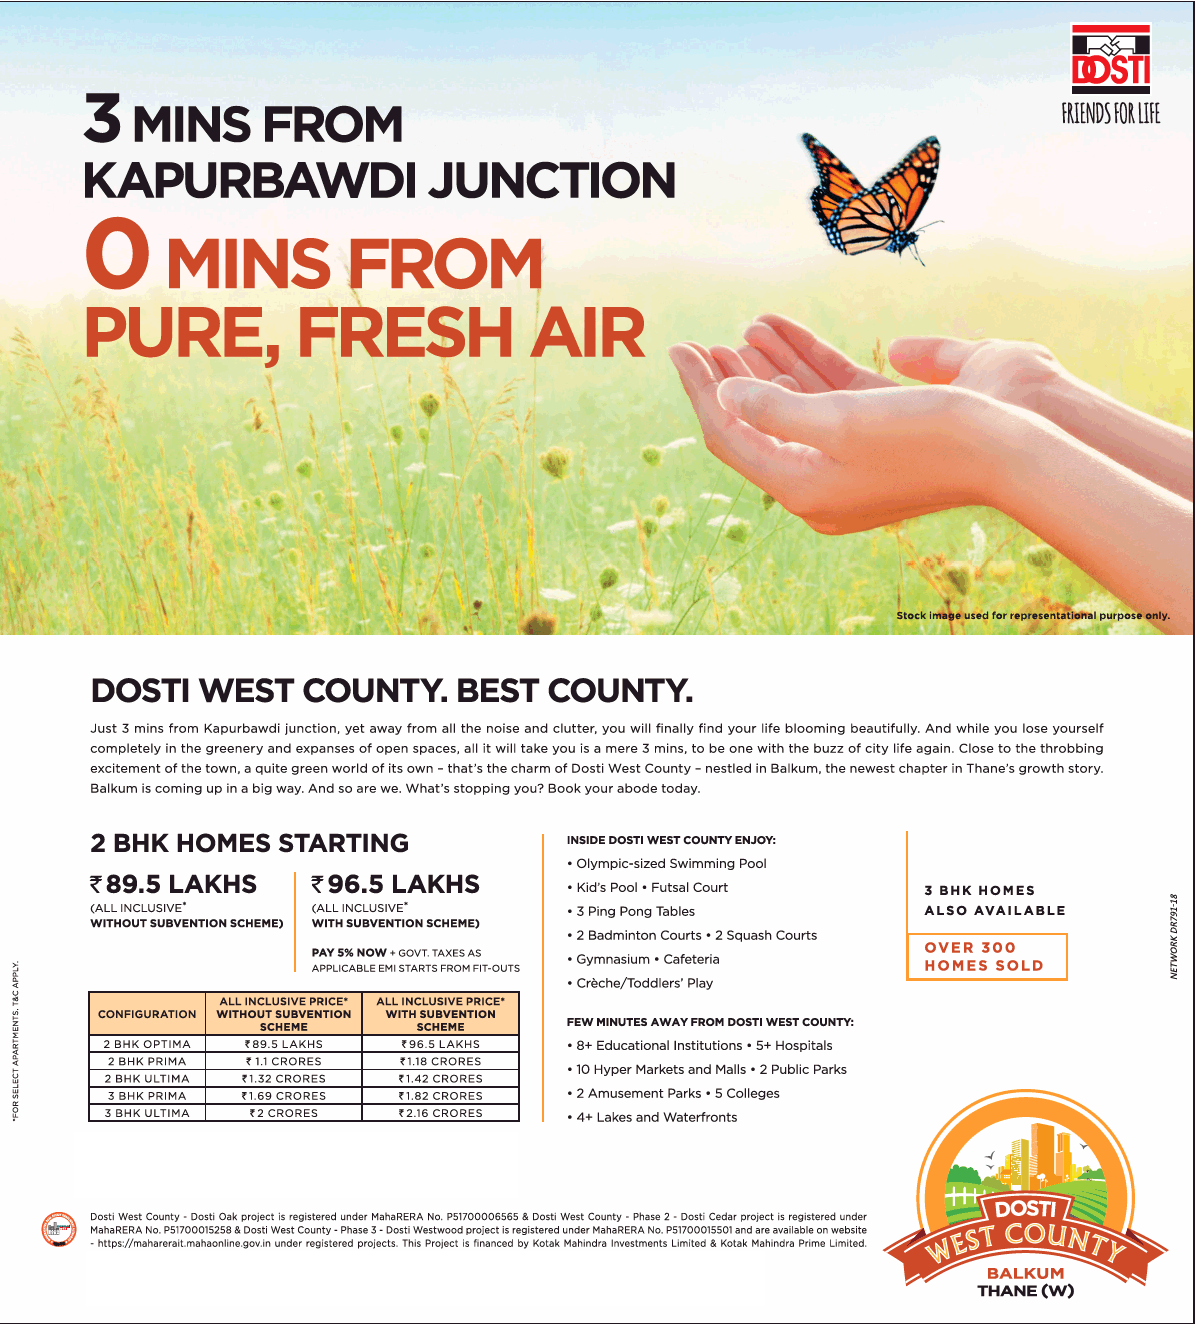 Book 2 BHK homes starting from Rs. 89.5 Lakhs at Dosti West County in Mumbai Update